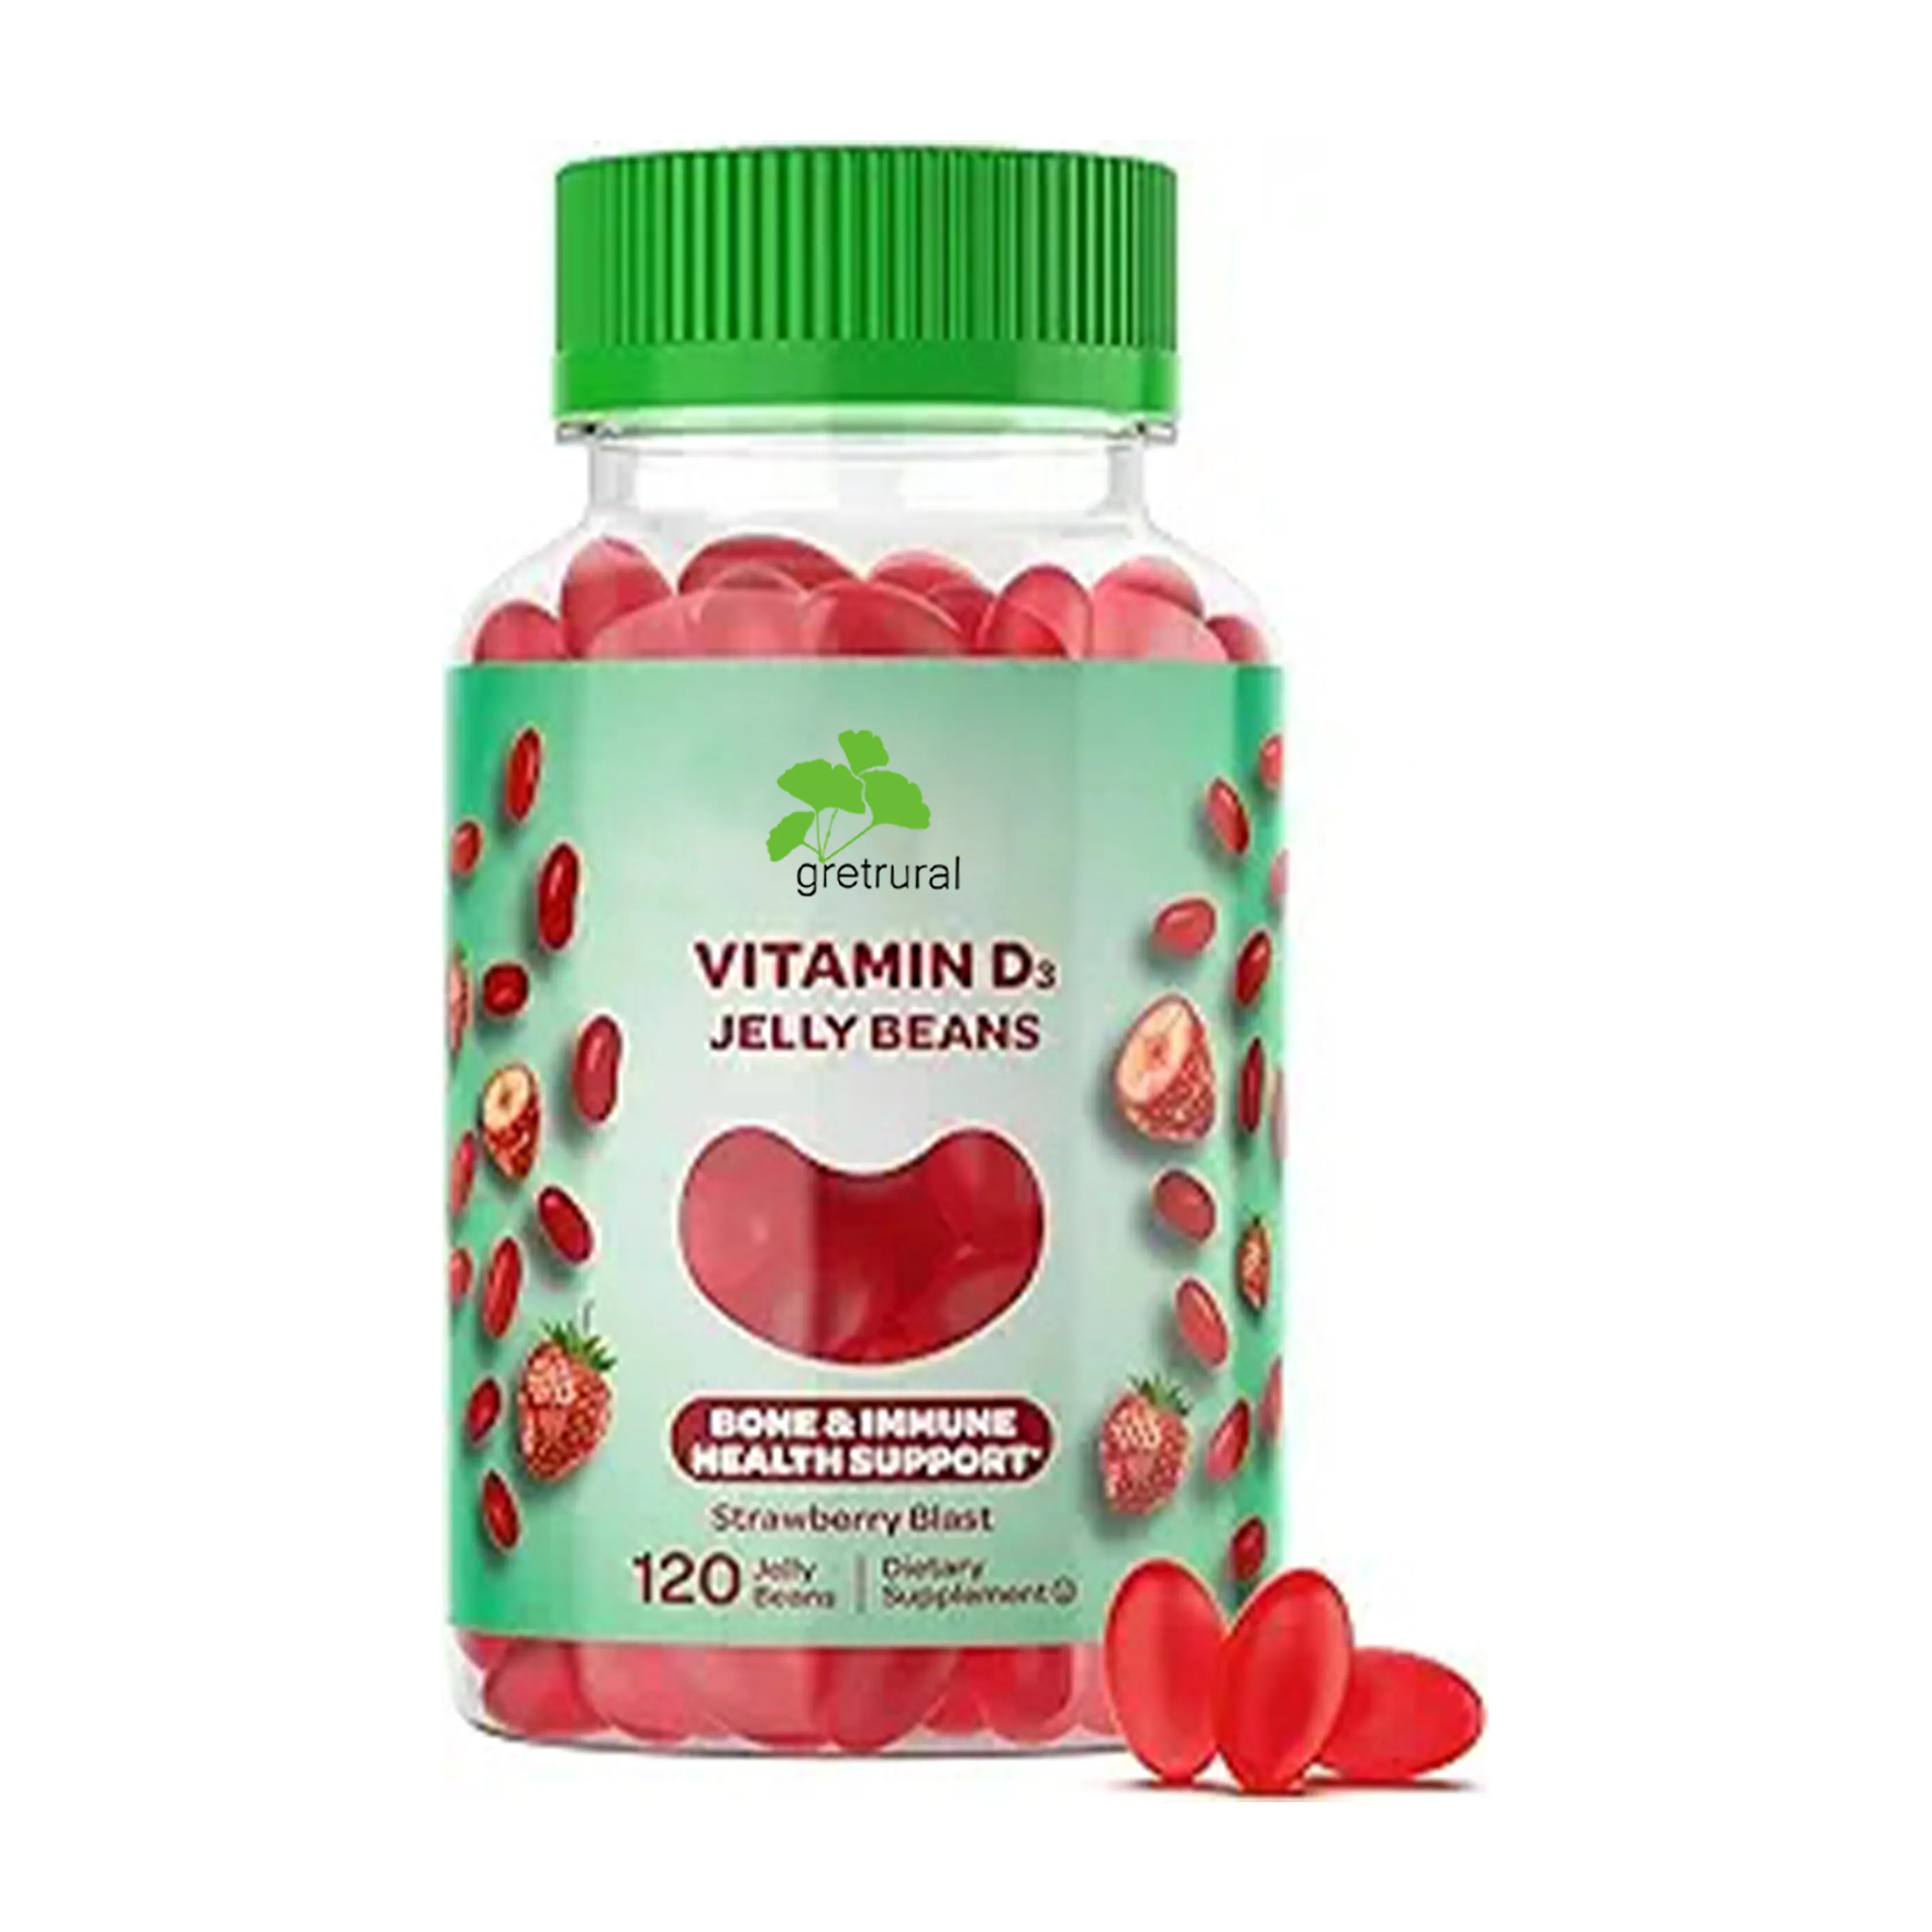 OEM/ODM Vitamin D3 Gummies for Adults, Immunity Support Nutritional Vegetarian Supplements, 120 Strawberry Blast Jelly Beans